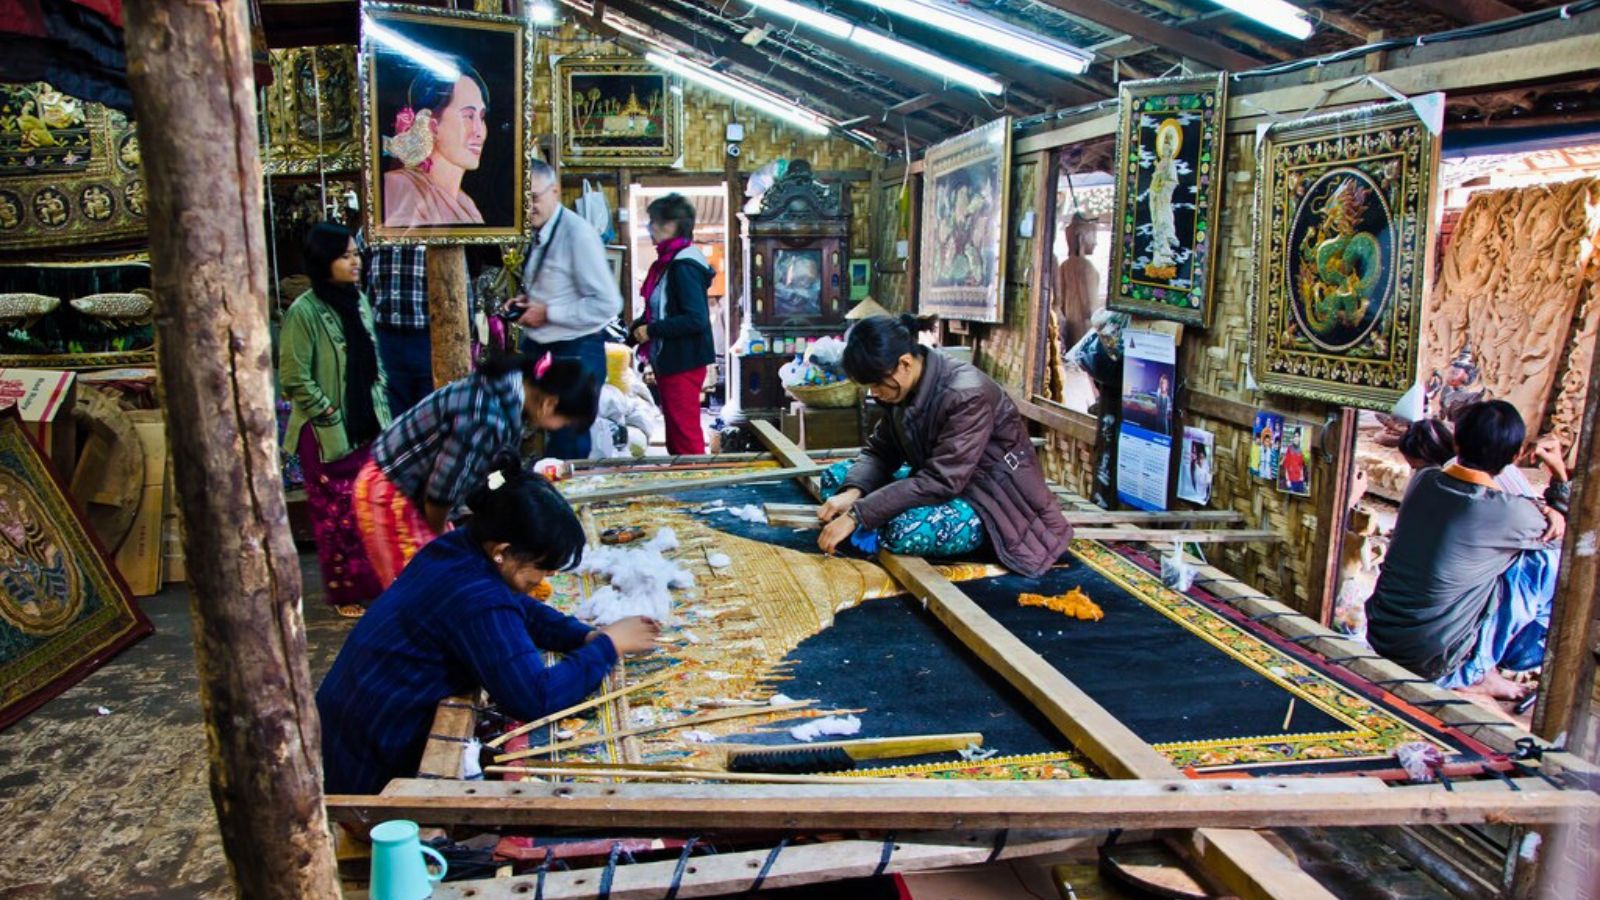 Each pattern on a tapestry in Myanmar is made meticulously